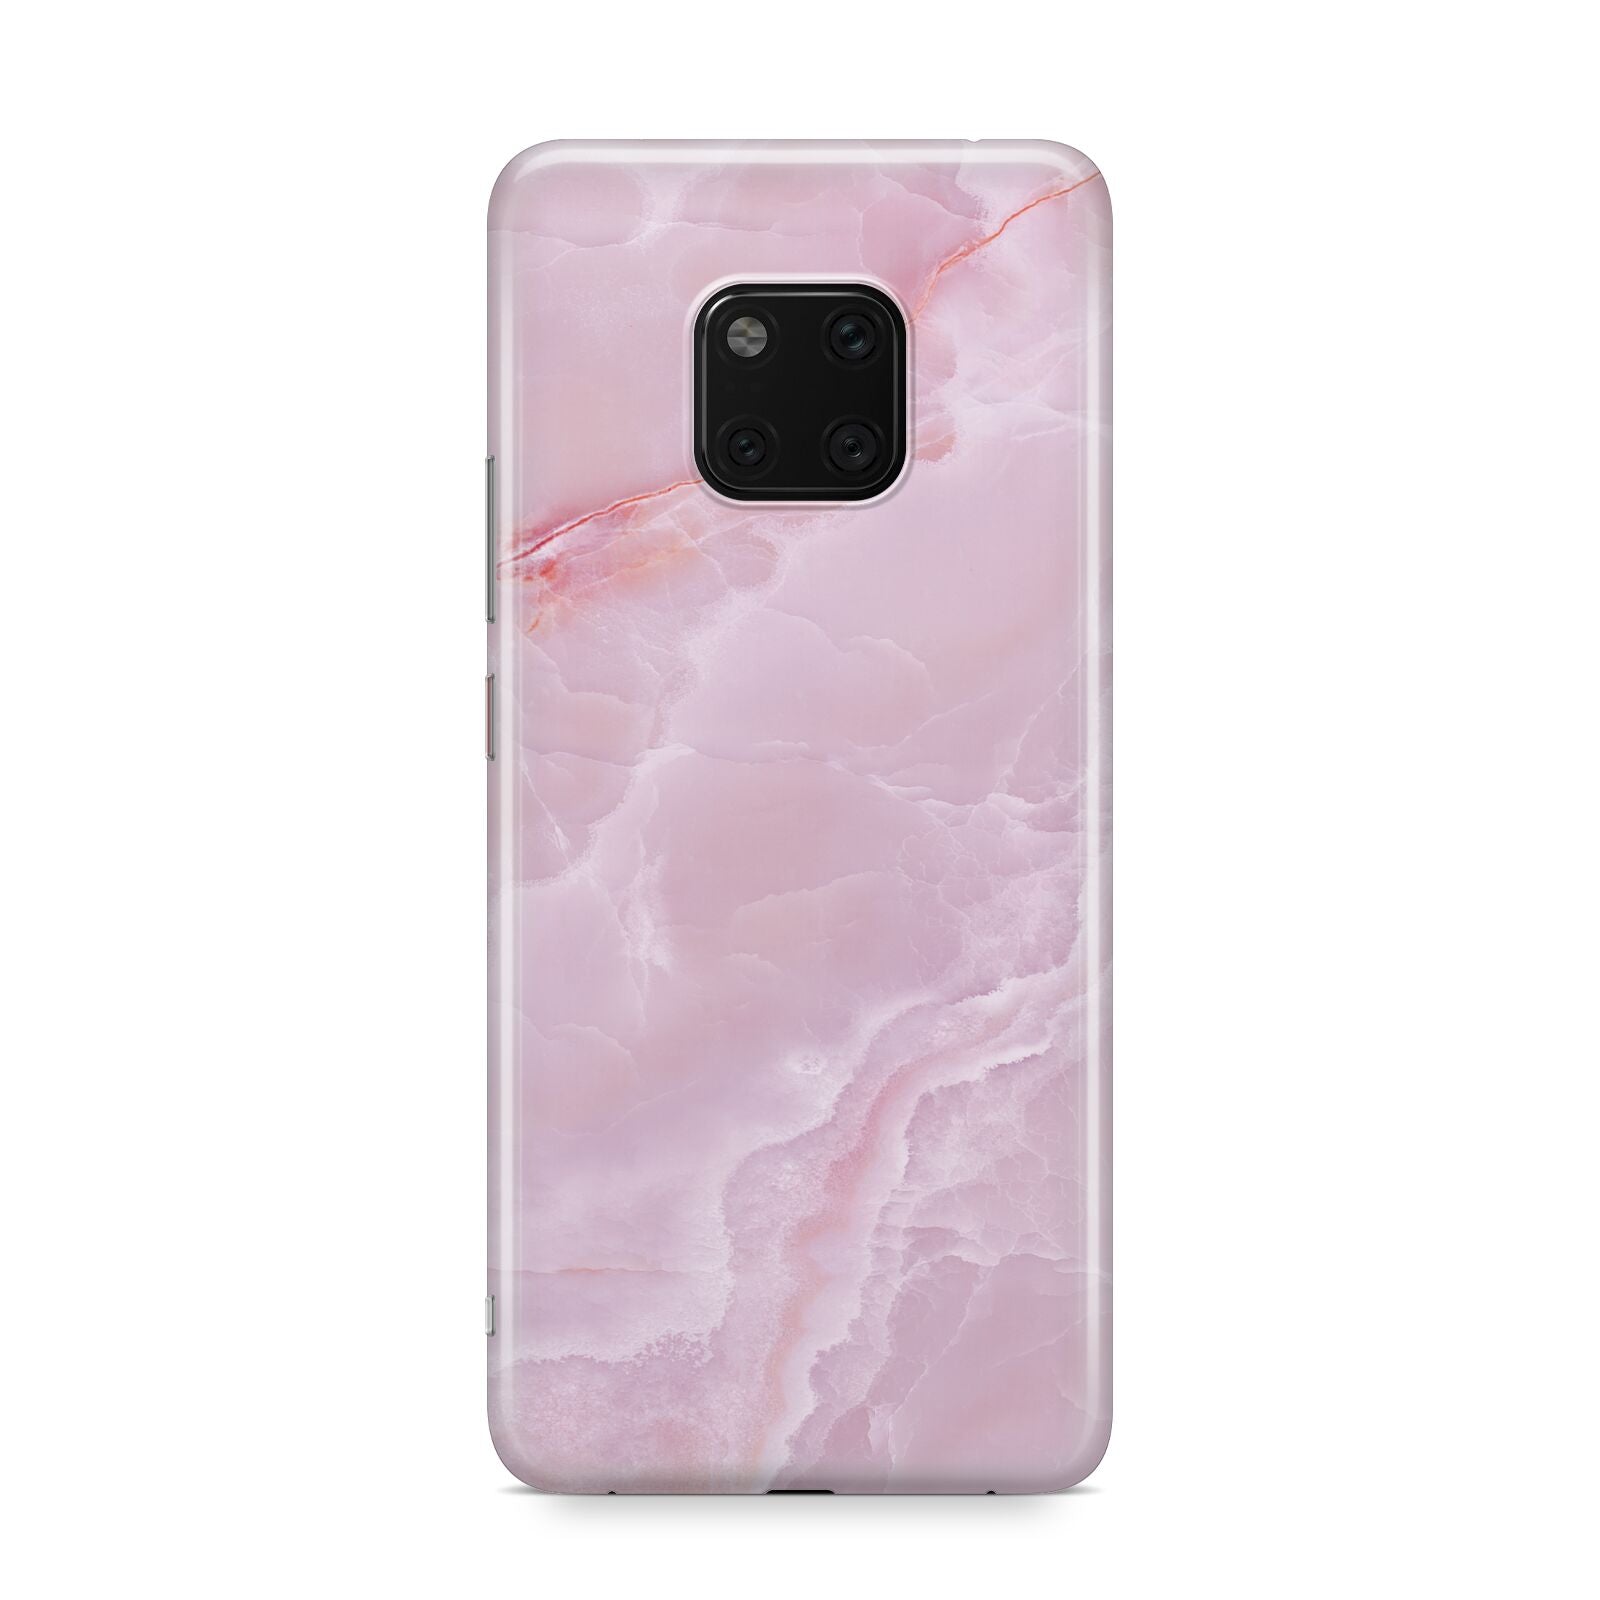 Dreamy Pink Marble Huawei Mate 20 Pro Phone Case